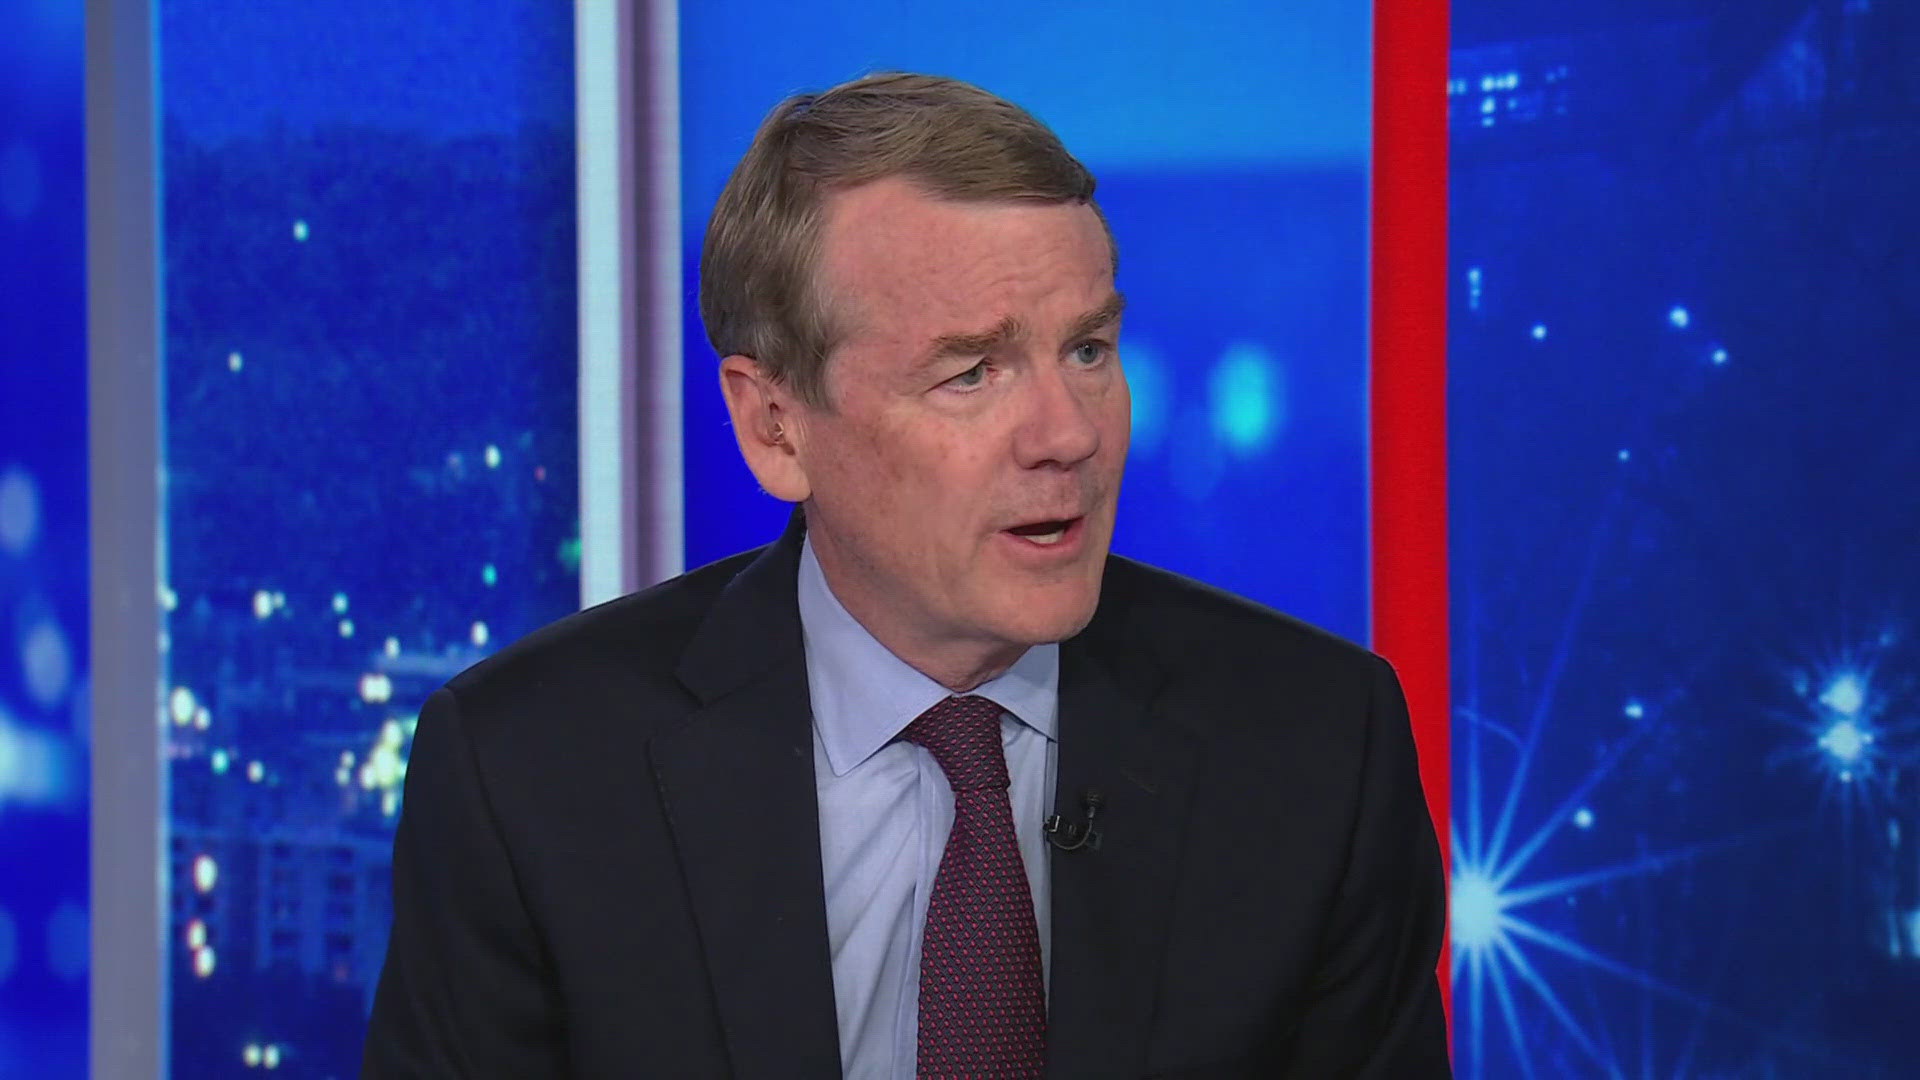 Democratic Senator Michael Bennet from Colorado told CNN's Kaitlan Collins Tuesday that President Biden cannot win the 2024 election.